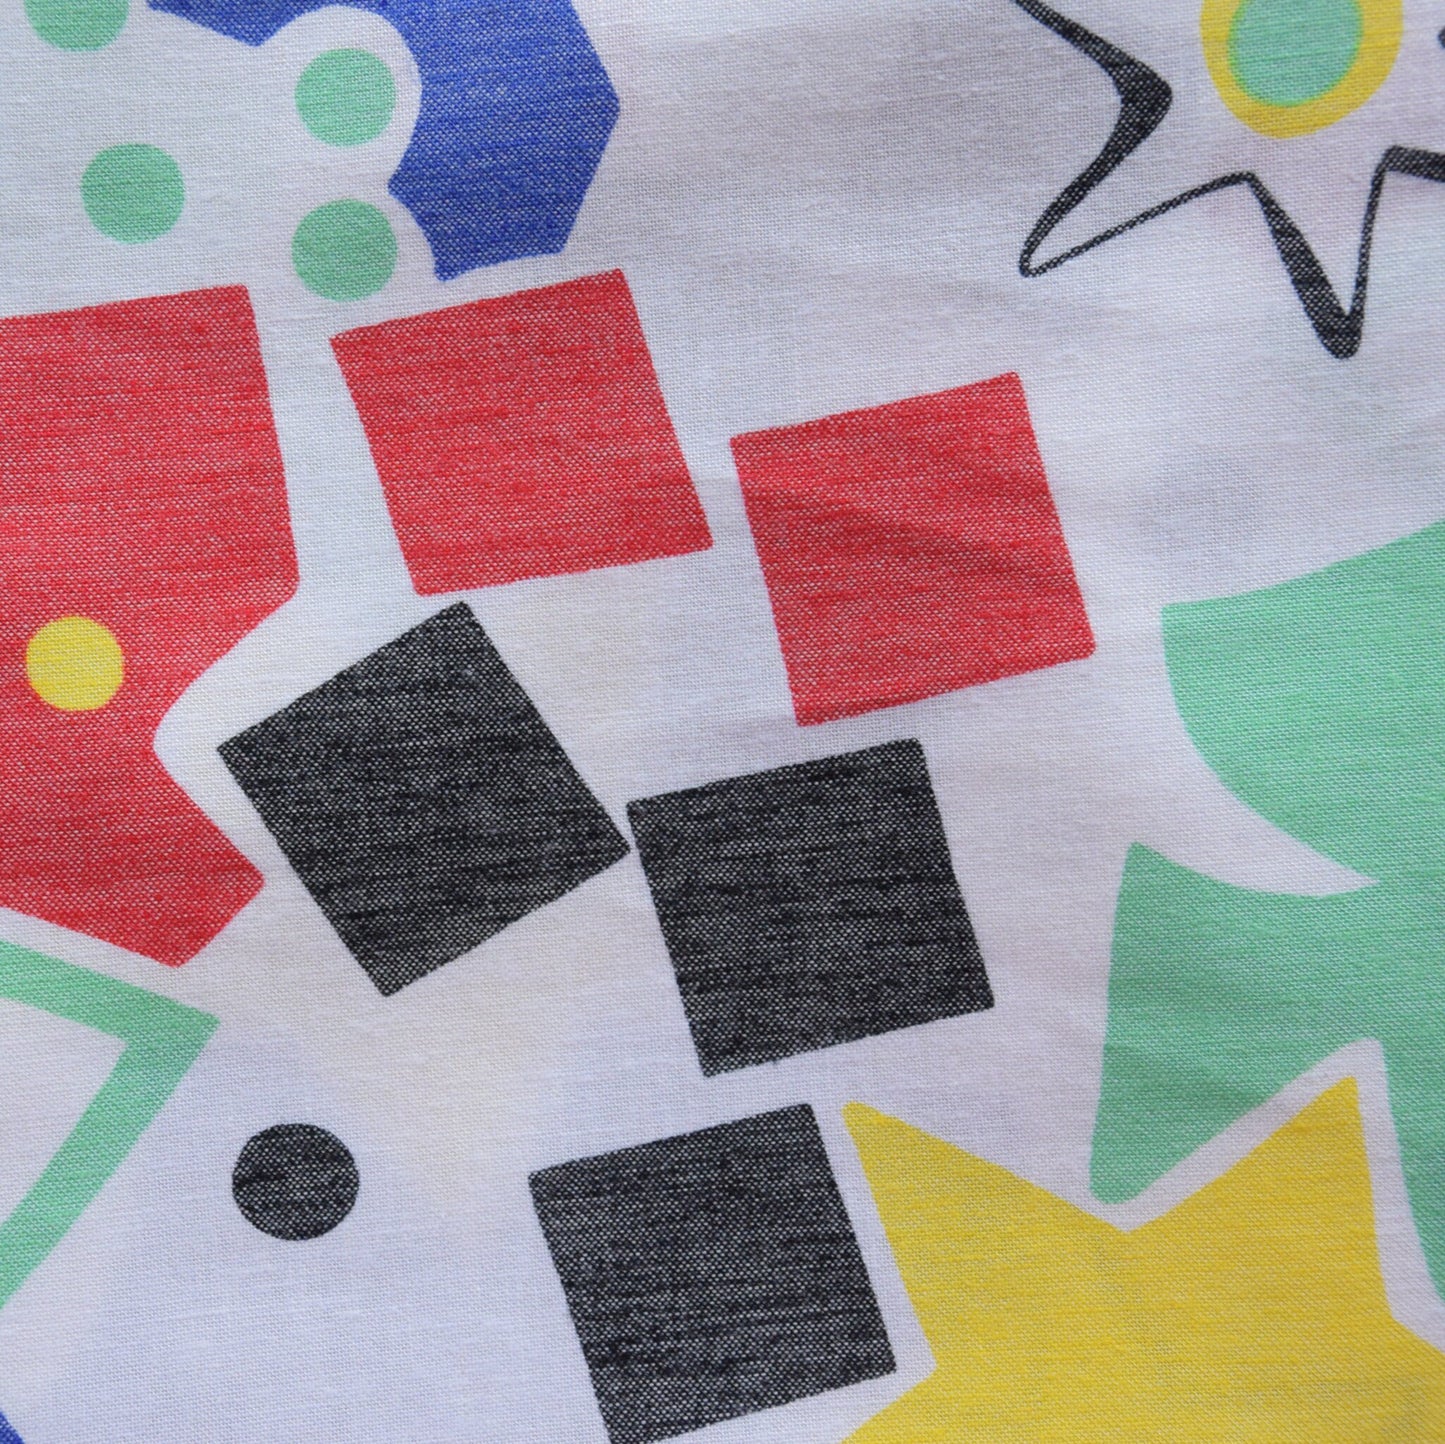 Upcycling cotton fabric with blue, yellow, red, green, black 90's geometric pattern